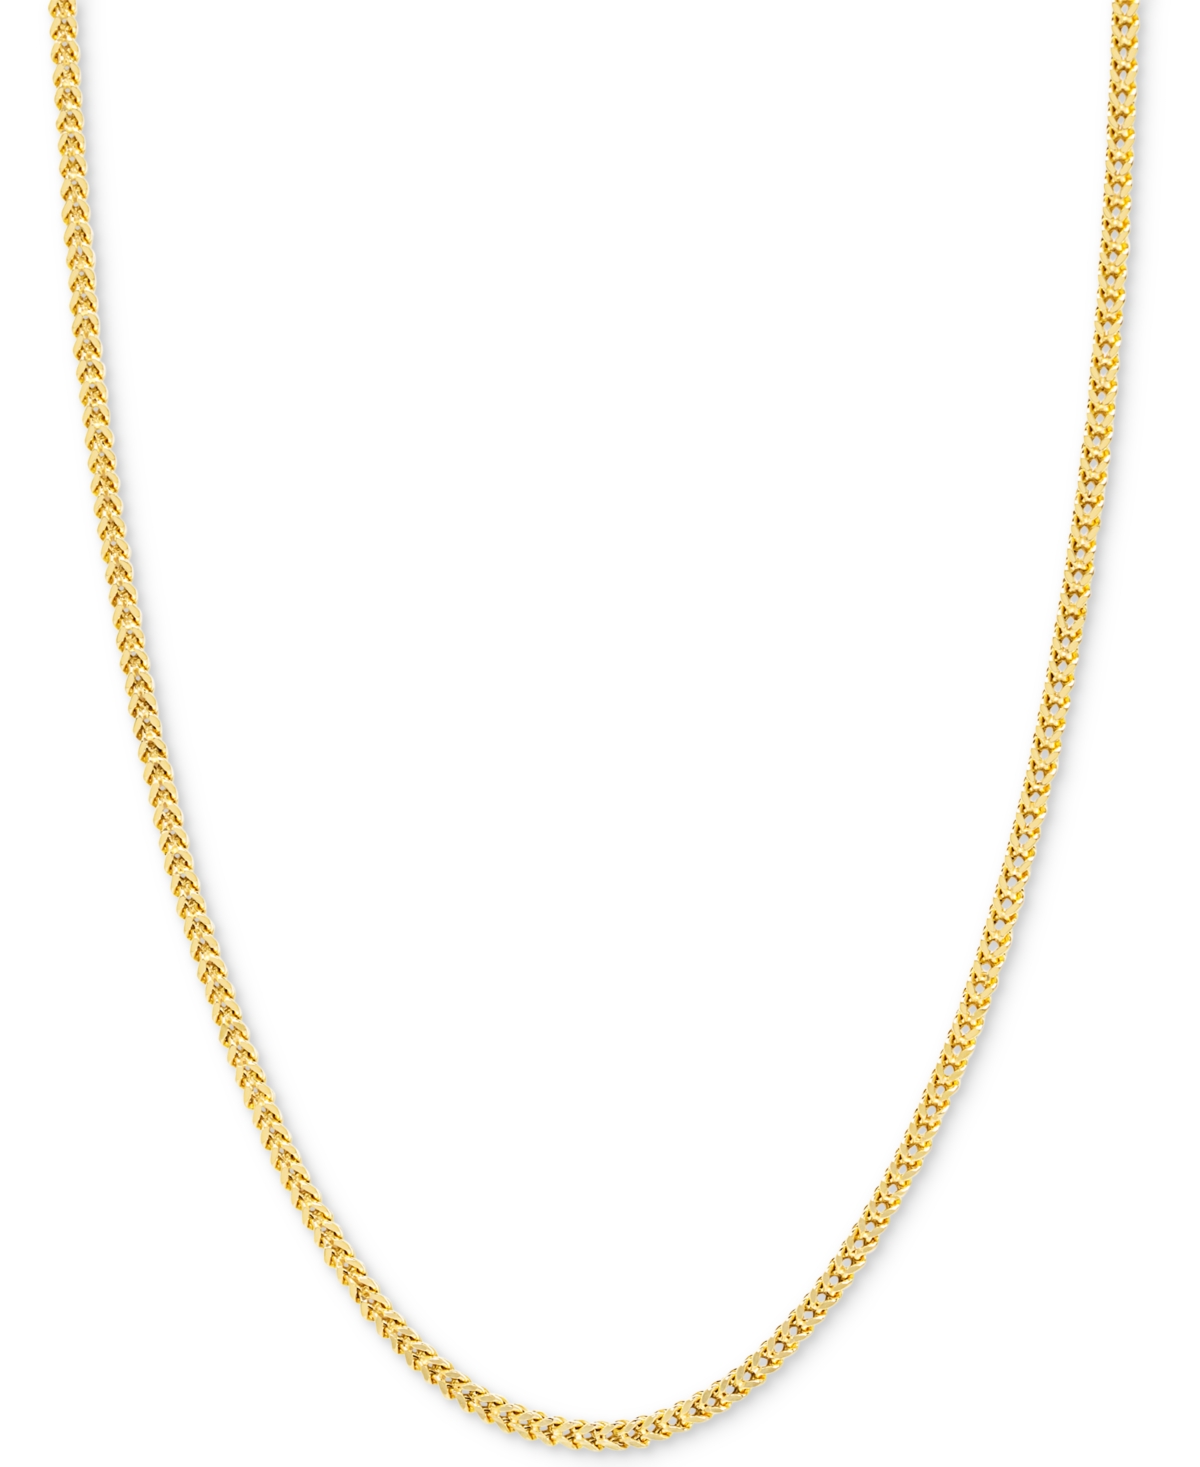 24" Franco Chain Necklace (1-7/8mm) in 14k Gold - Yellow Gold